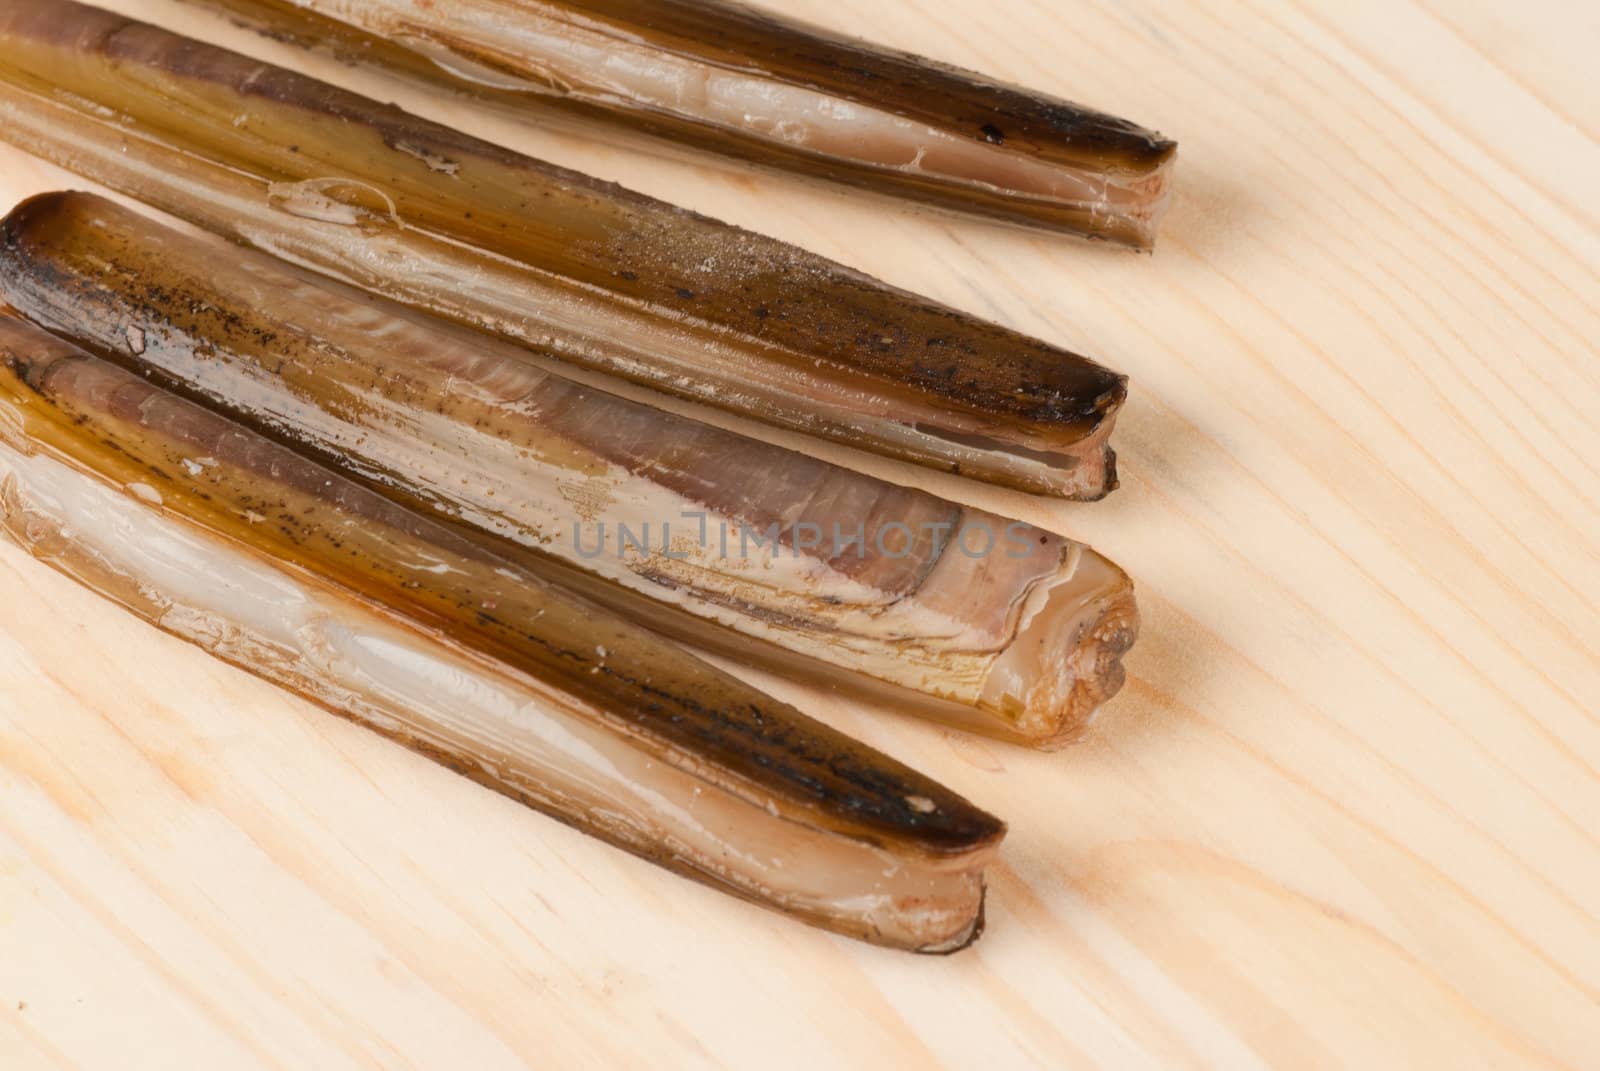 Fresh razor clams in their shell on a wooden board